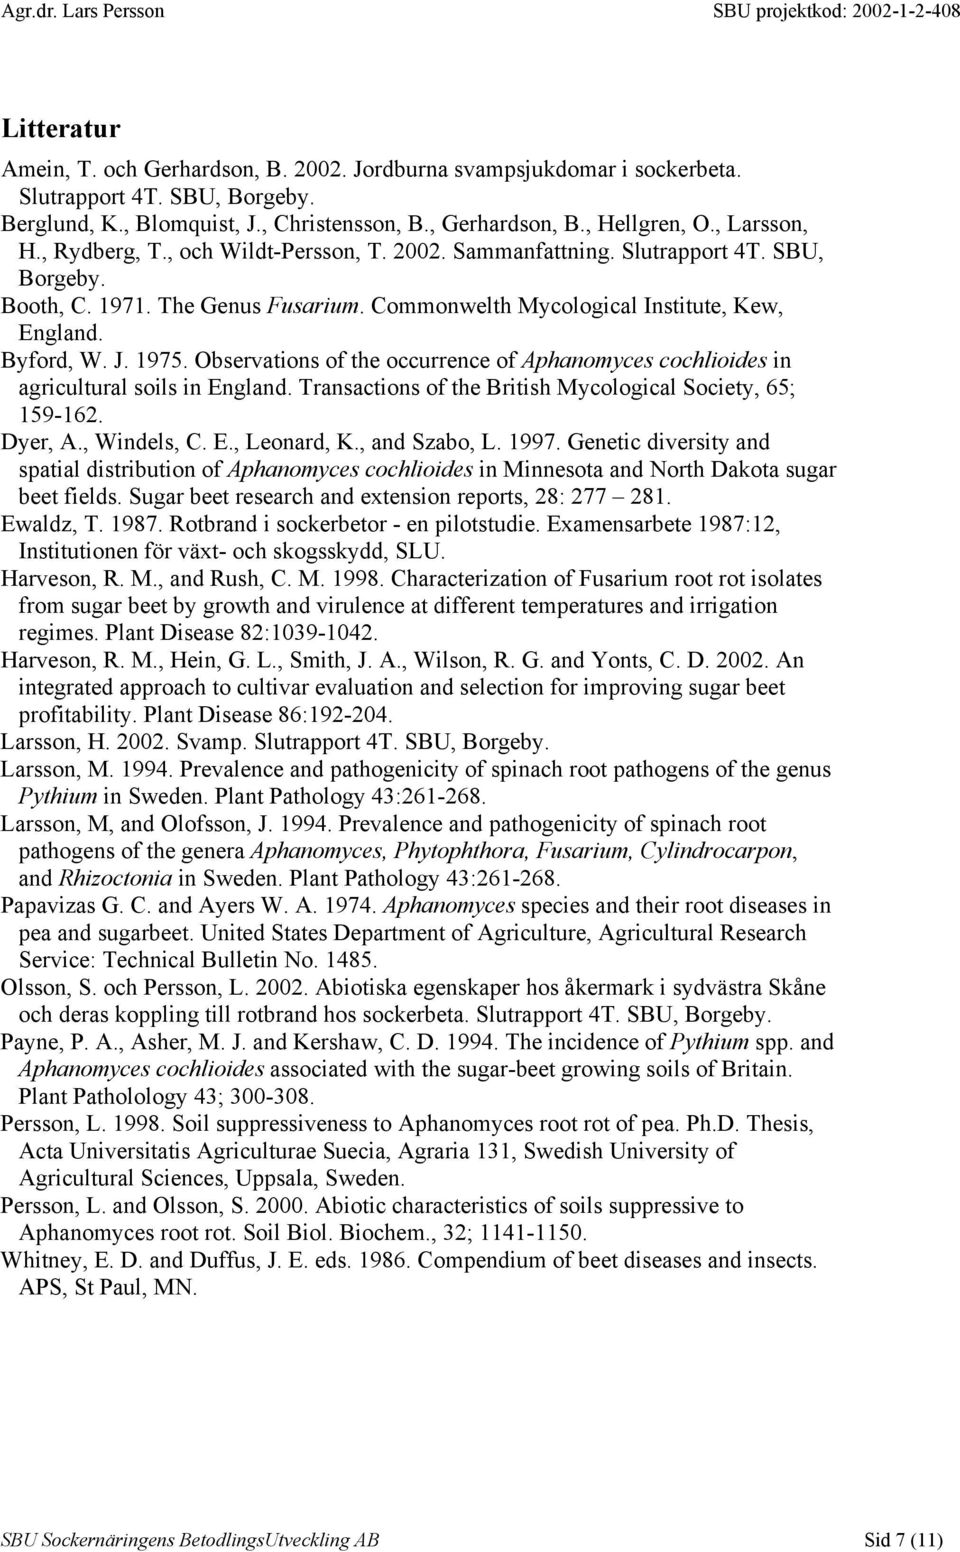 1975. Observations of the occurrence of Aphanomyces cochlioides in agricultural soils in England. Transactions of the British Mycological Society, 65; 159-162. Dyer, A., Windels, C. E., Leonard, K.